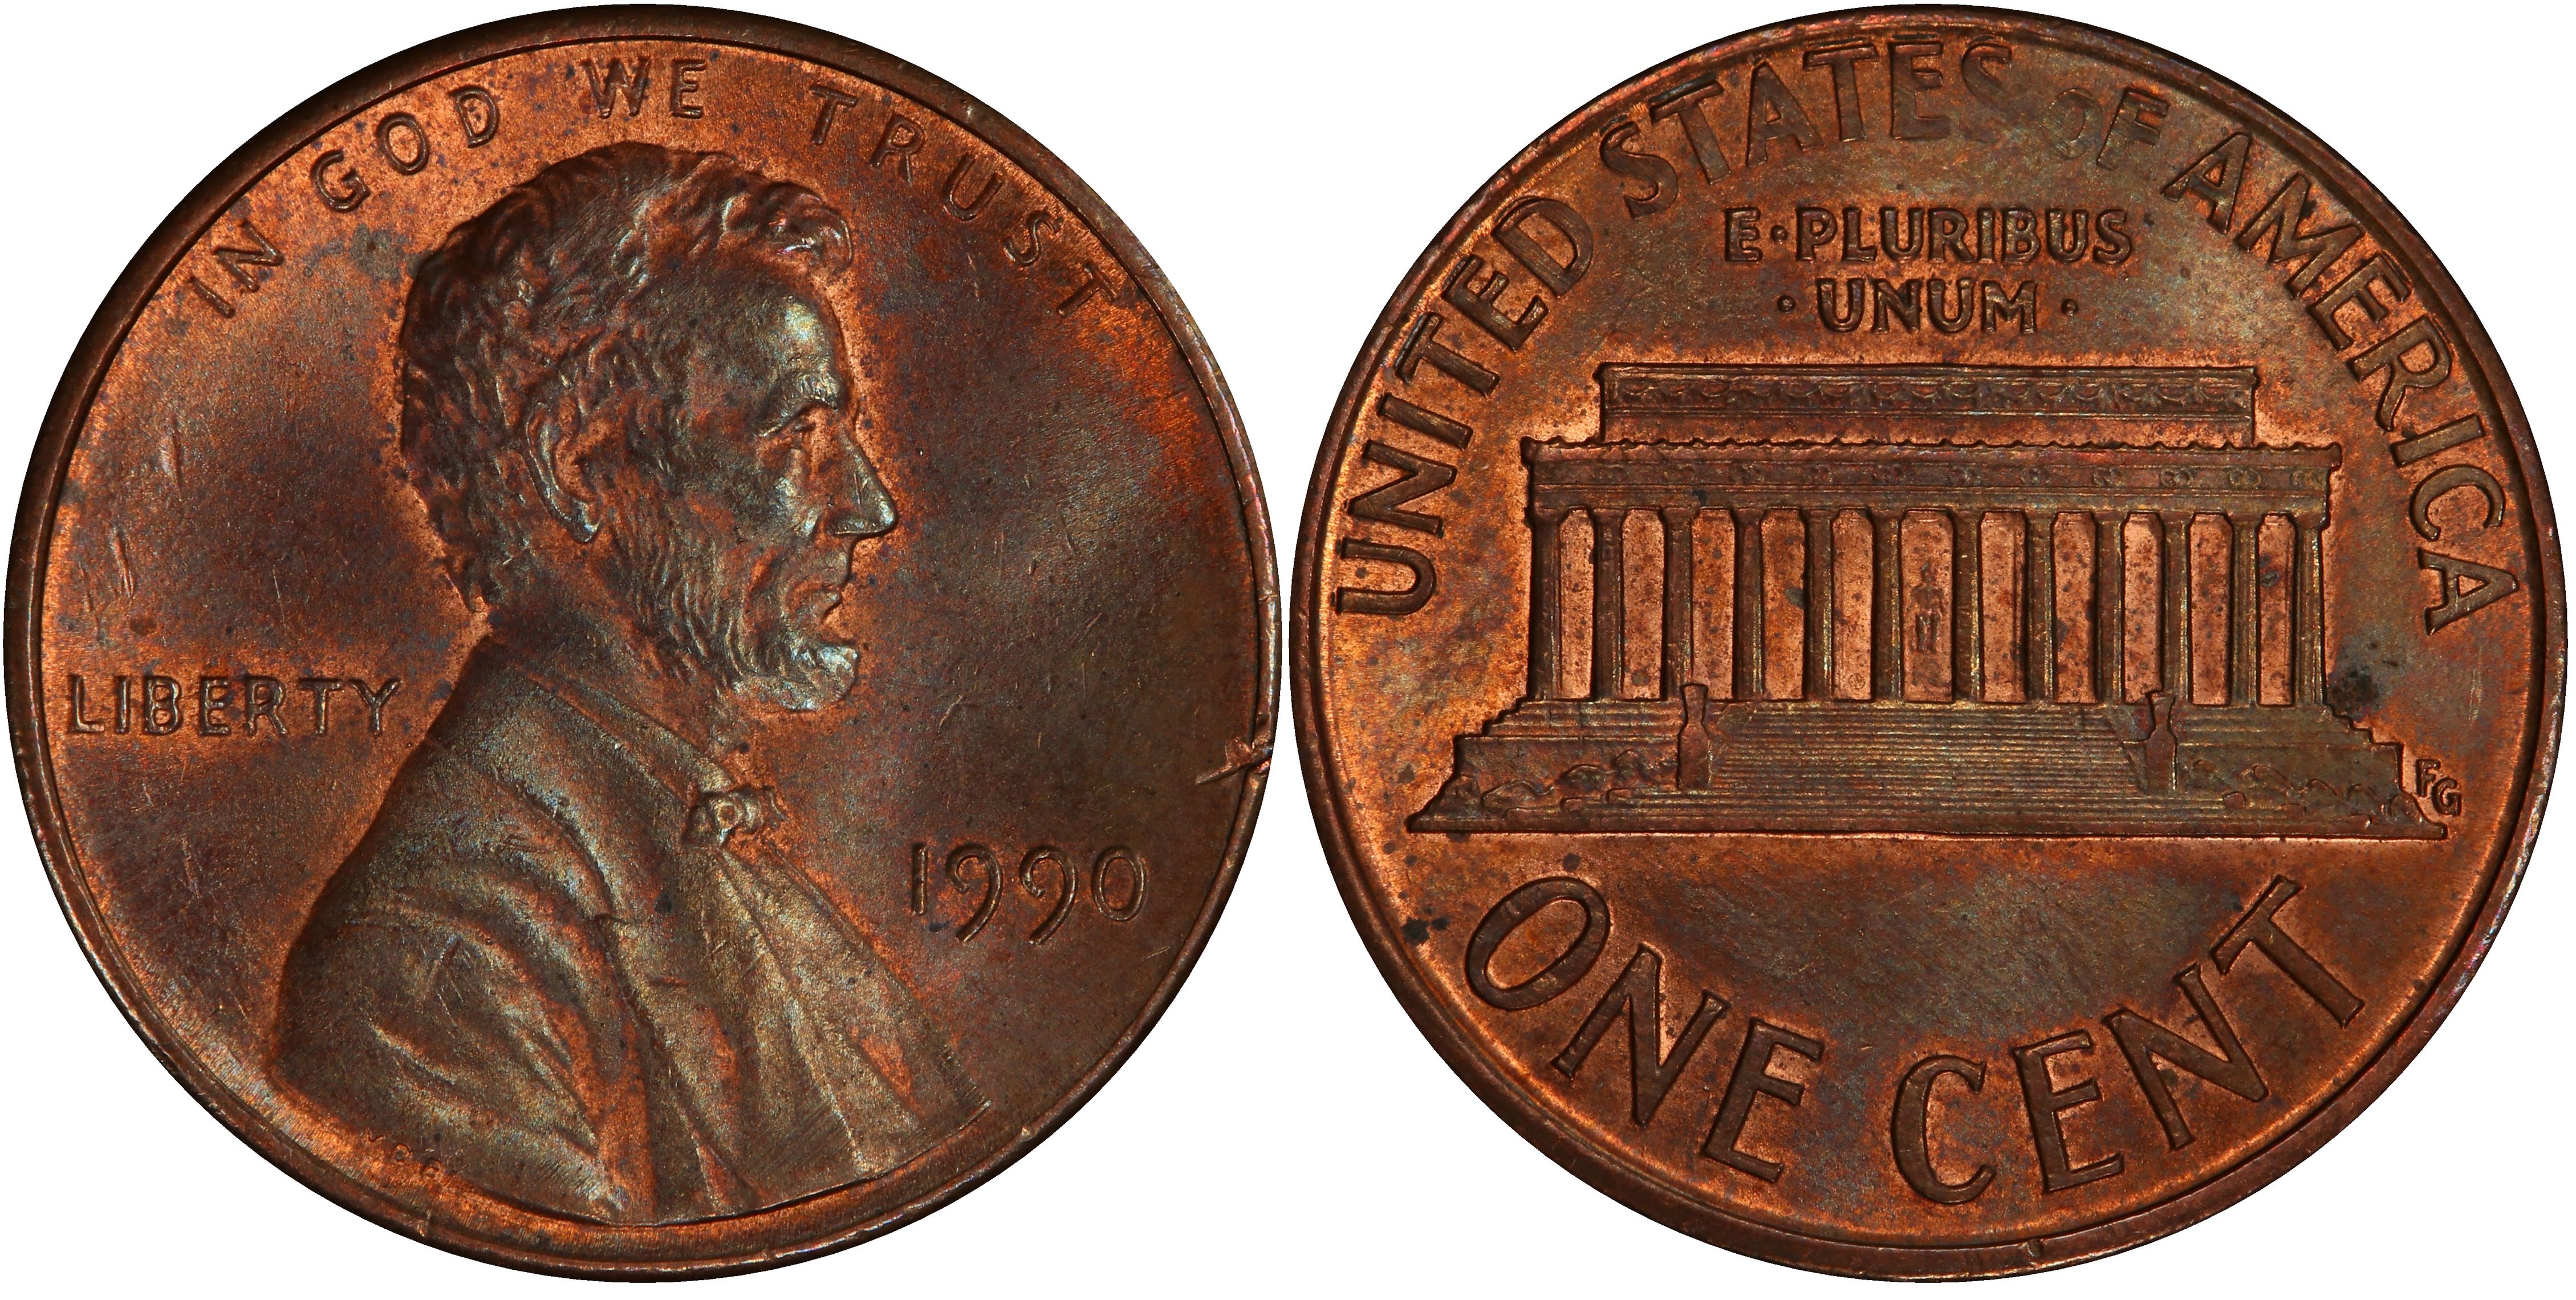 1990-D PCGS MS67RD Lincoln Cent